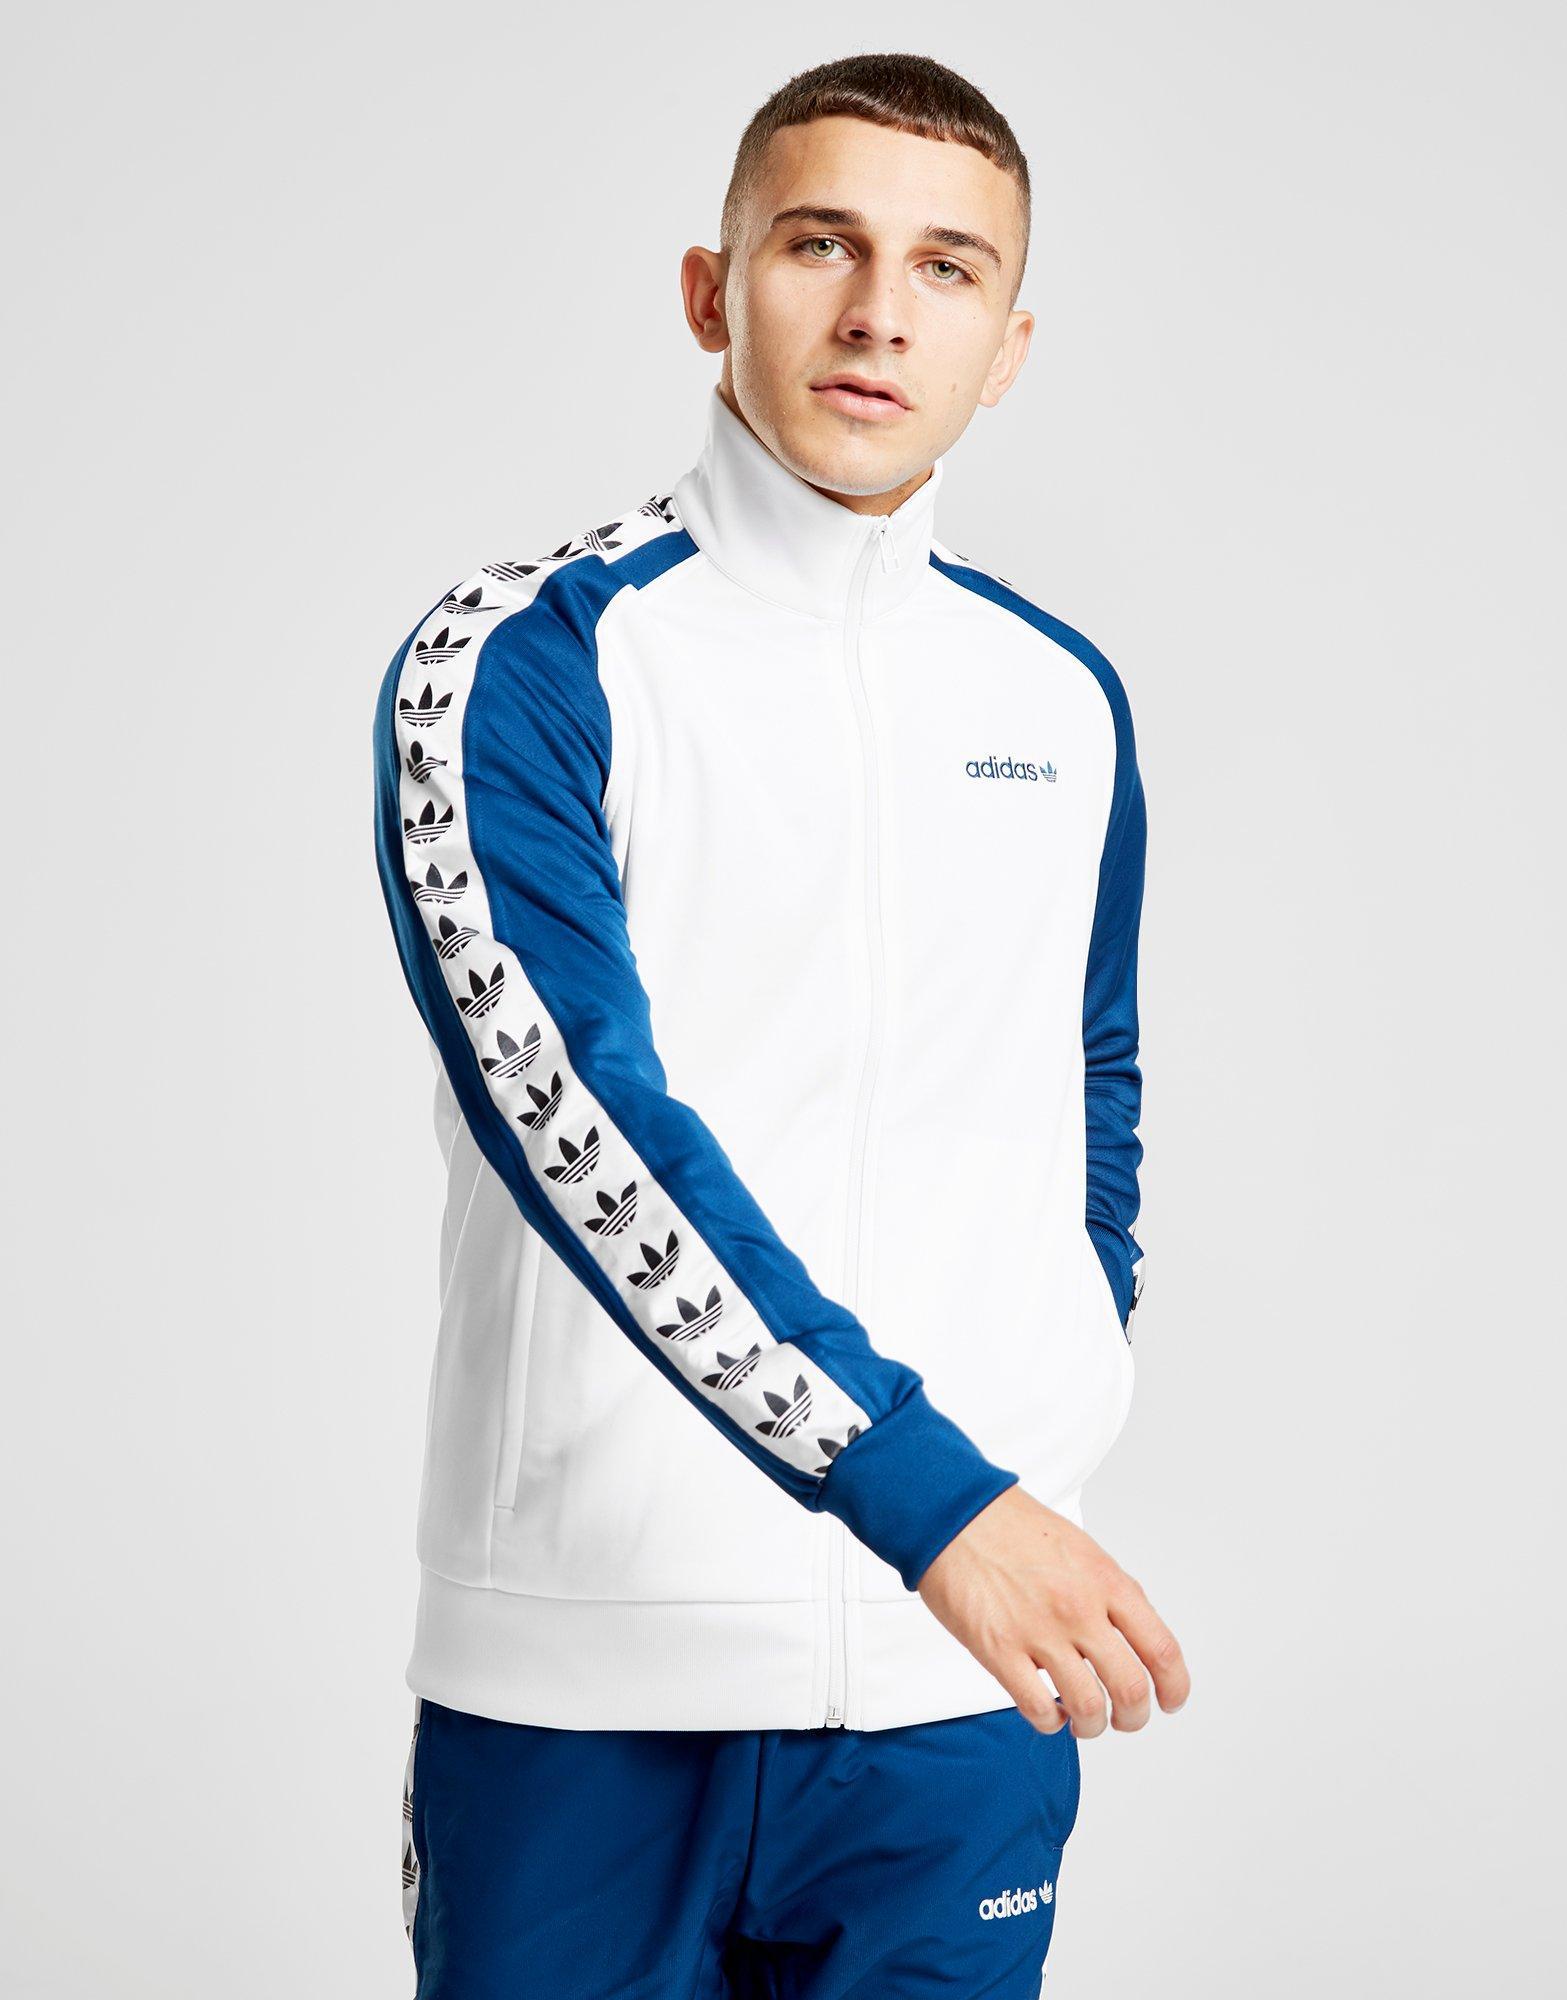 tracksuit for running